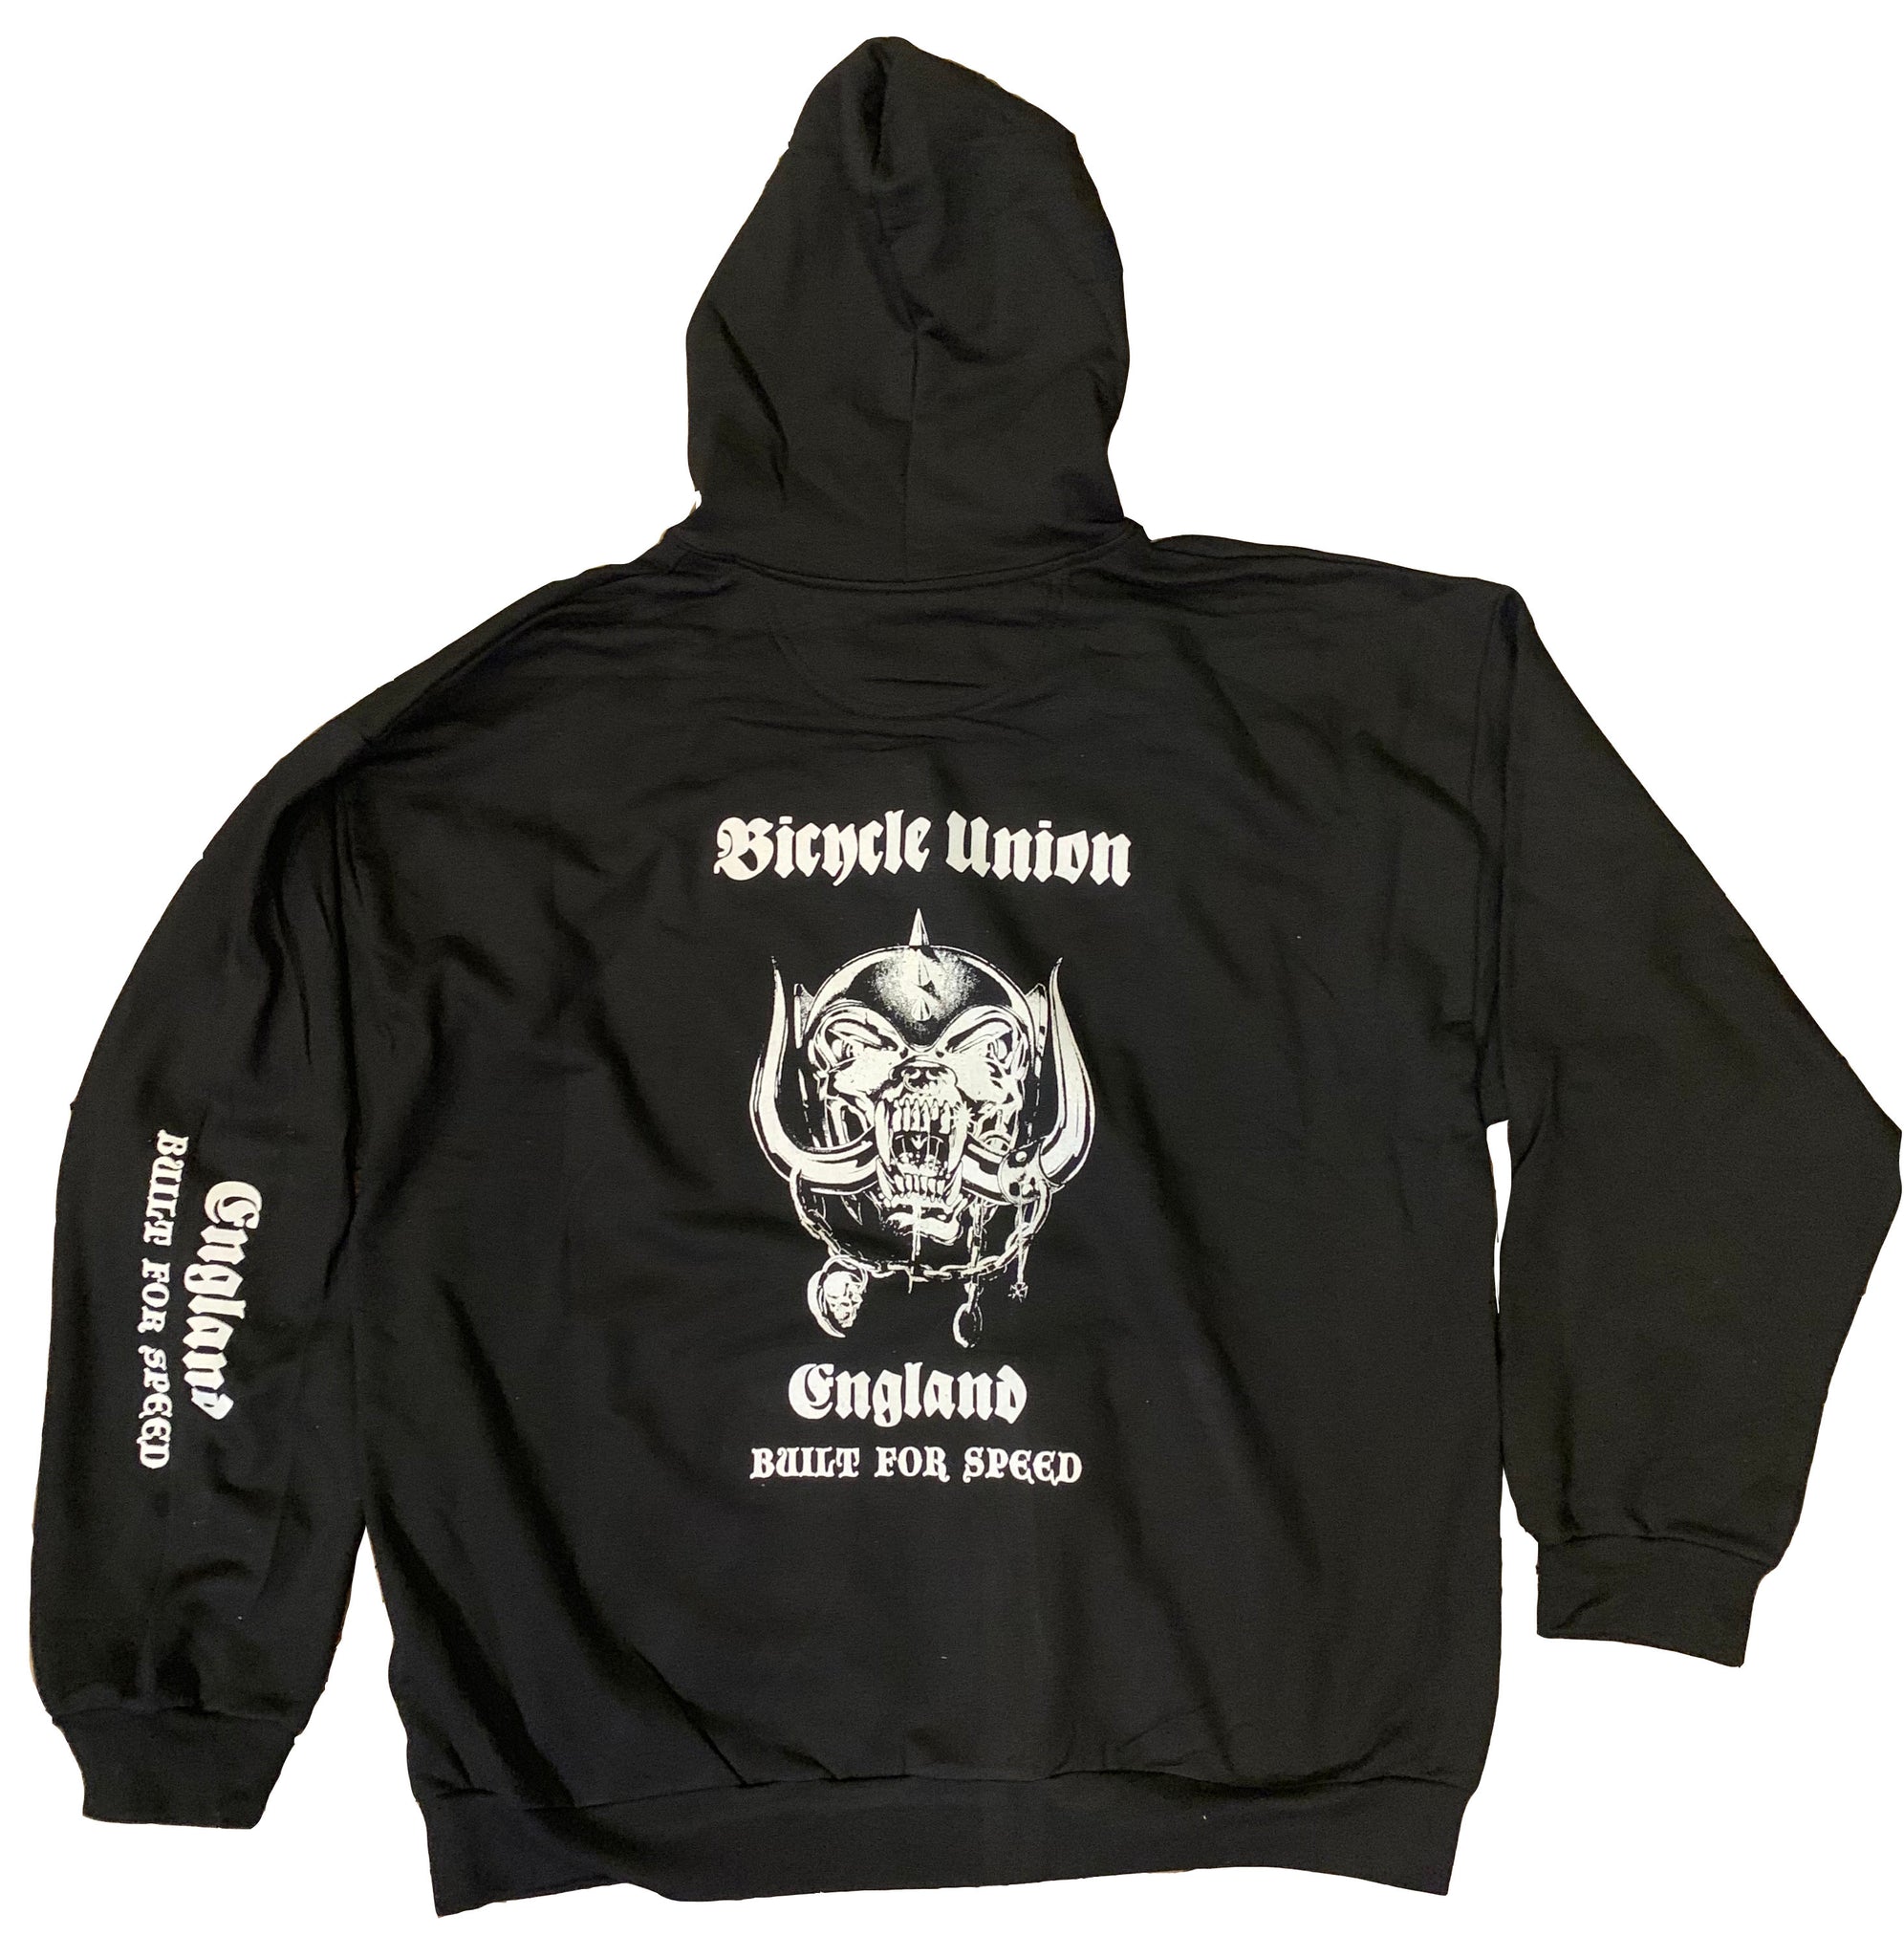 Bicycle Union Built for speed hoody